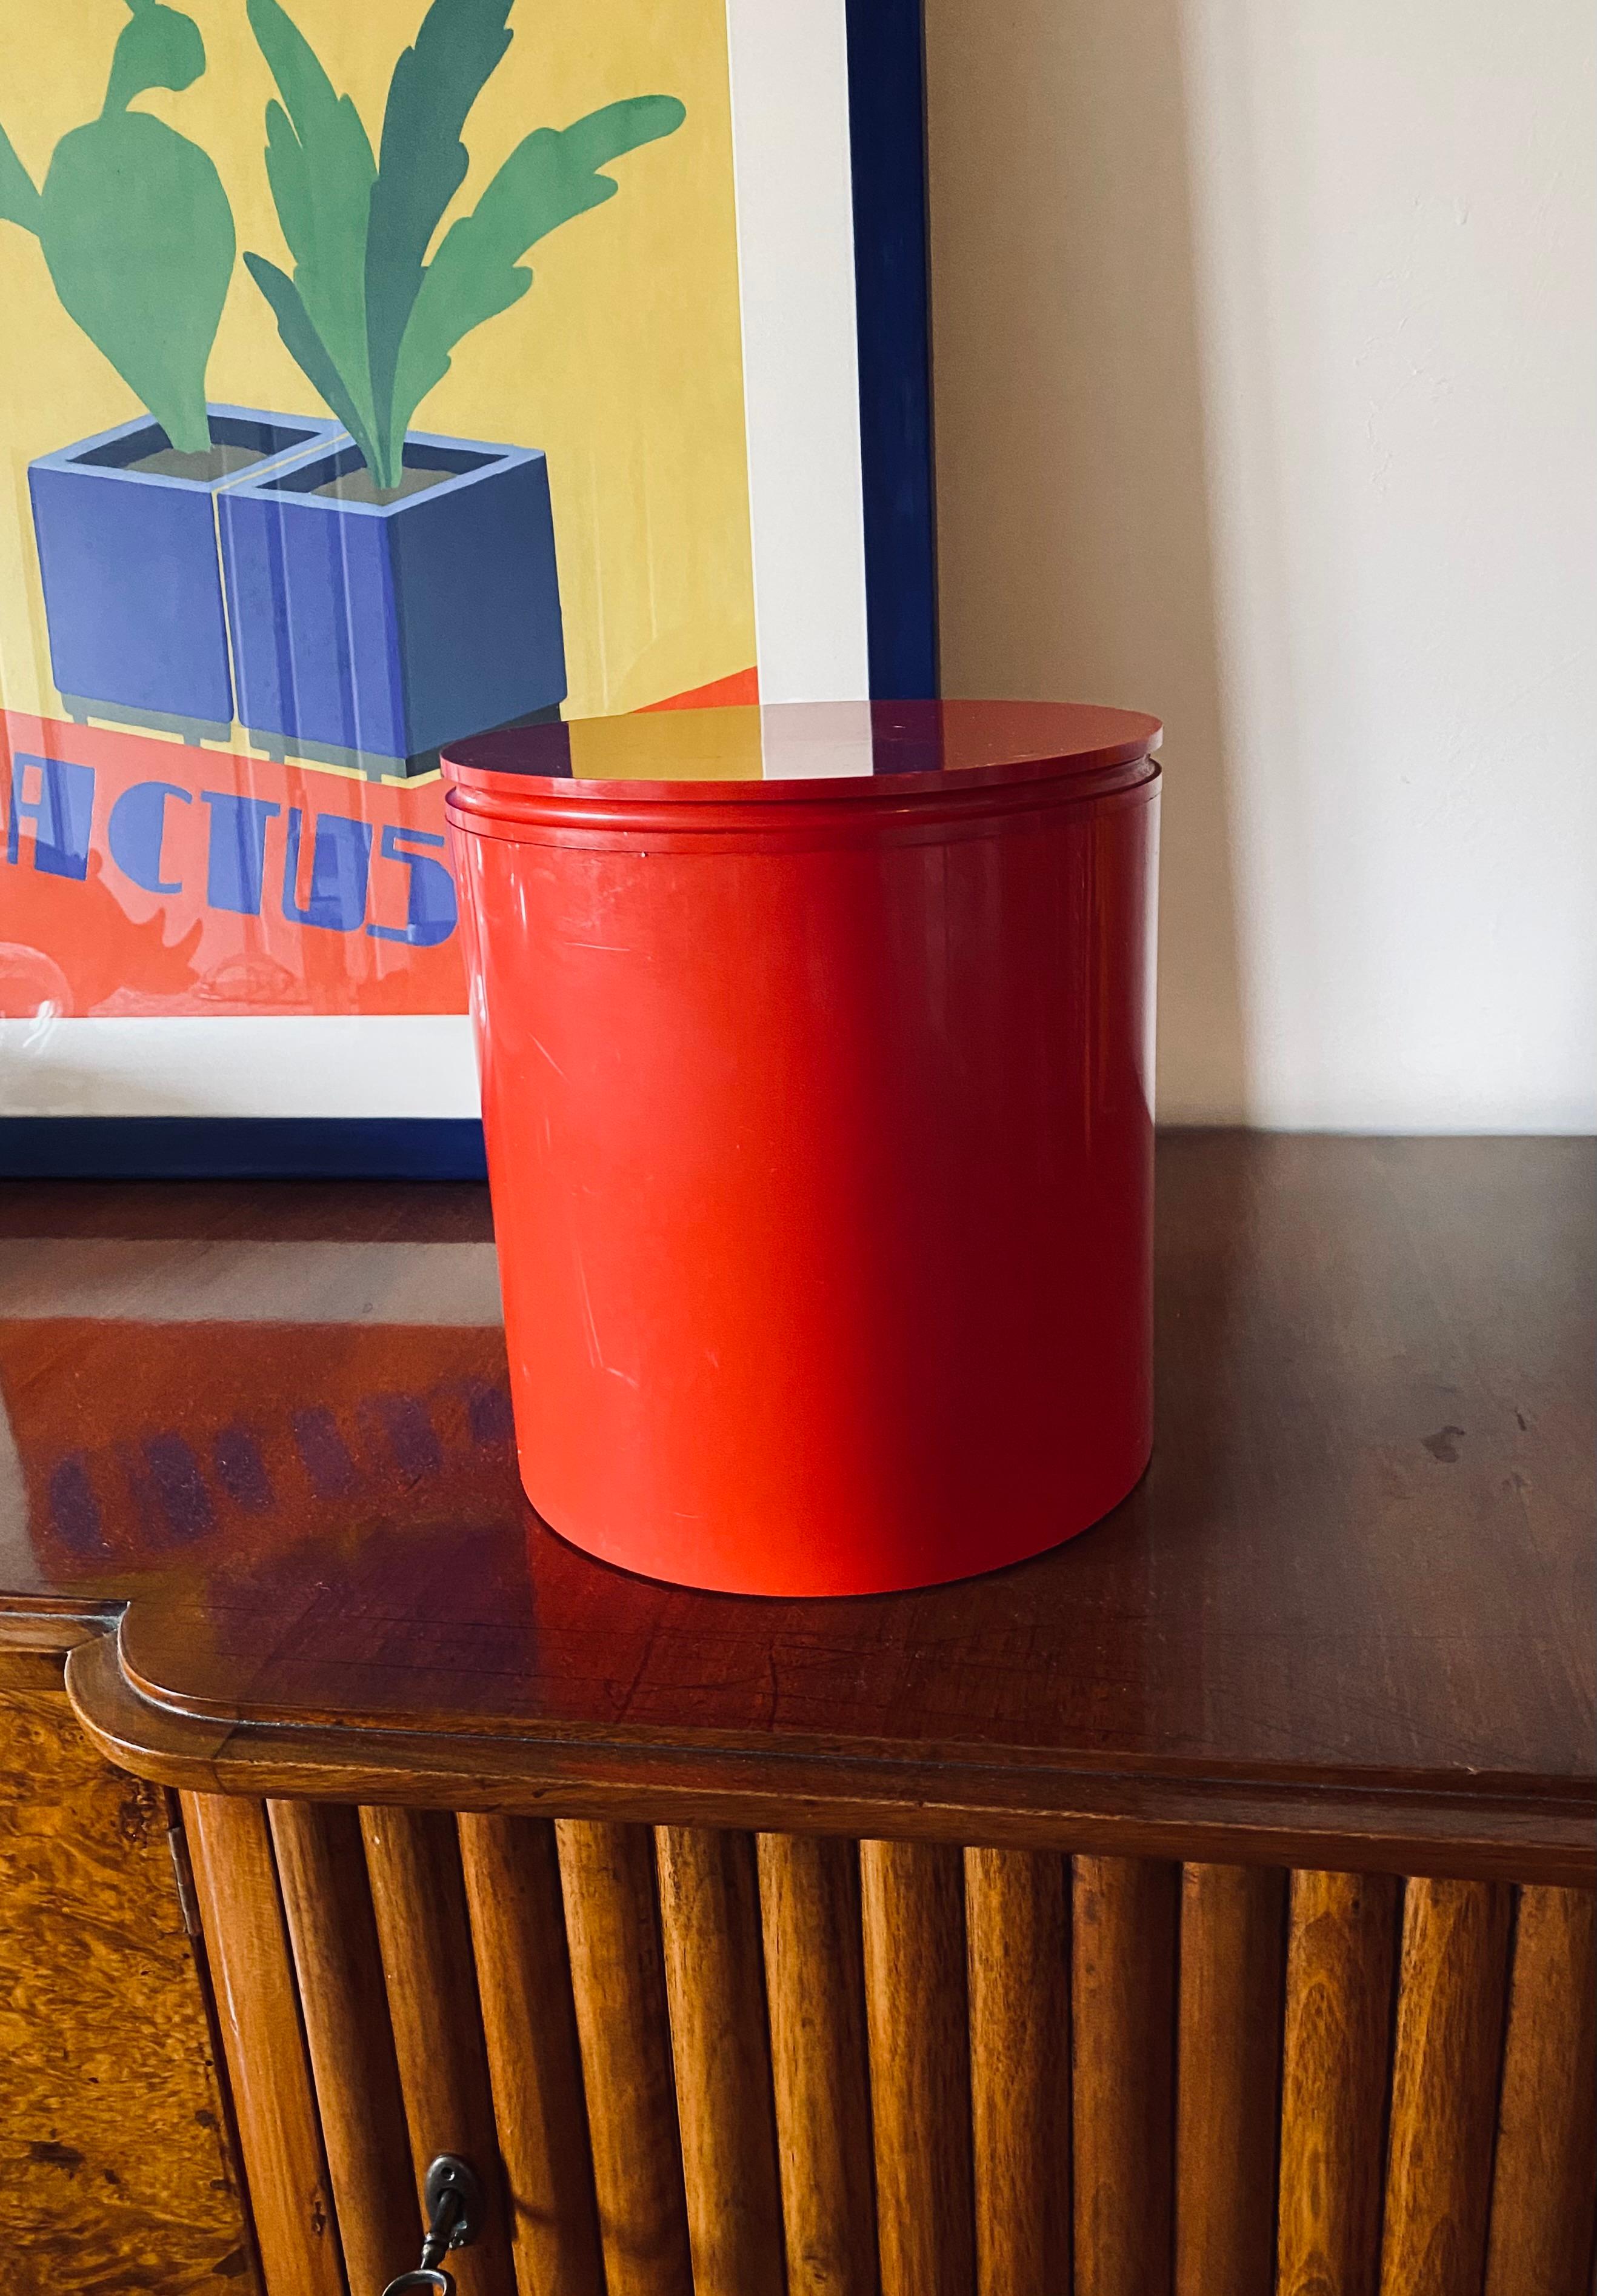 Red biscuit jar / paper basket mod. 7305 designed by Anna Castelli Ferrari

Kartell Italy, 1970s

H 24 x 22 cm

Conditions: excellent consistent with age and use